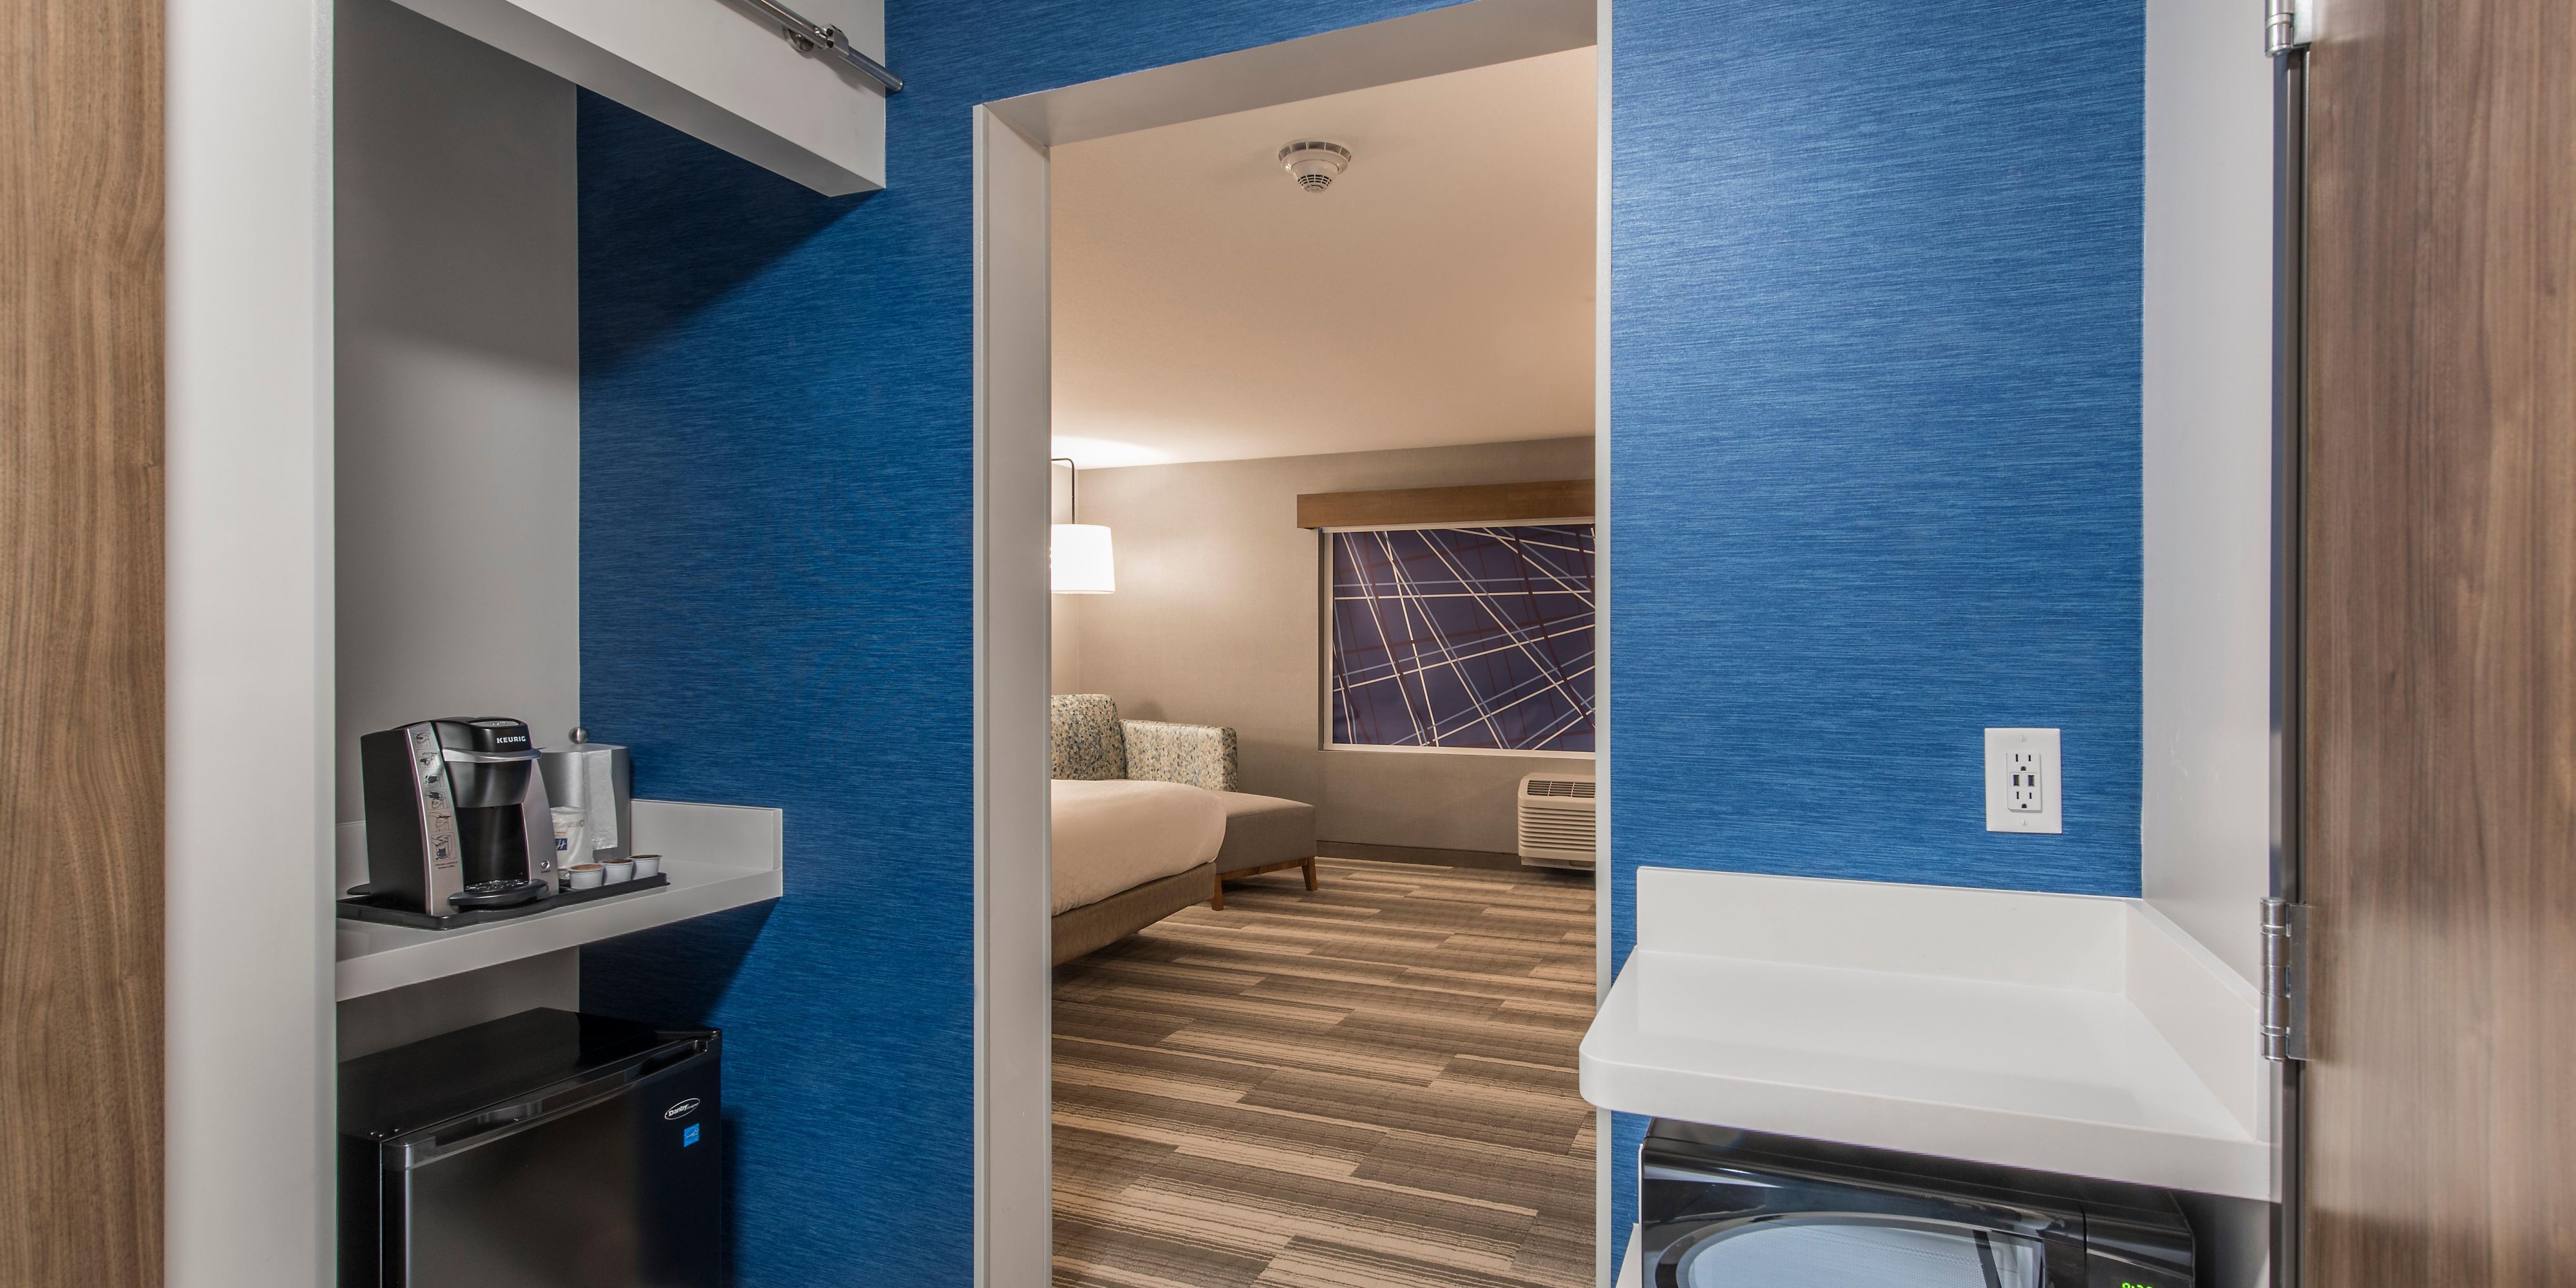 We have it. Our spacious suites are ideal for families or for an extended stay.  